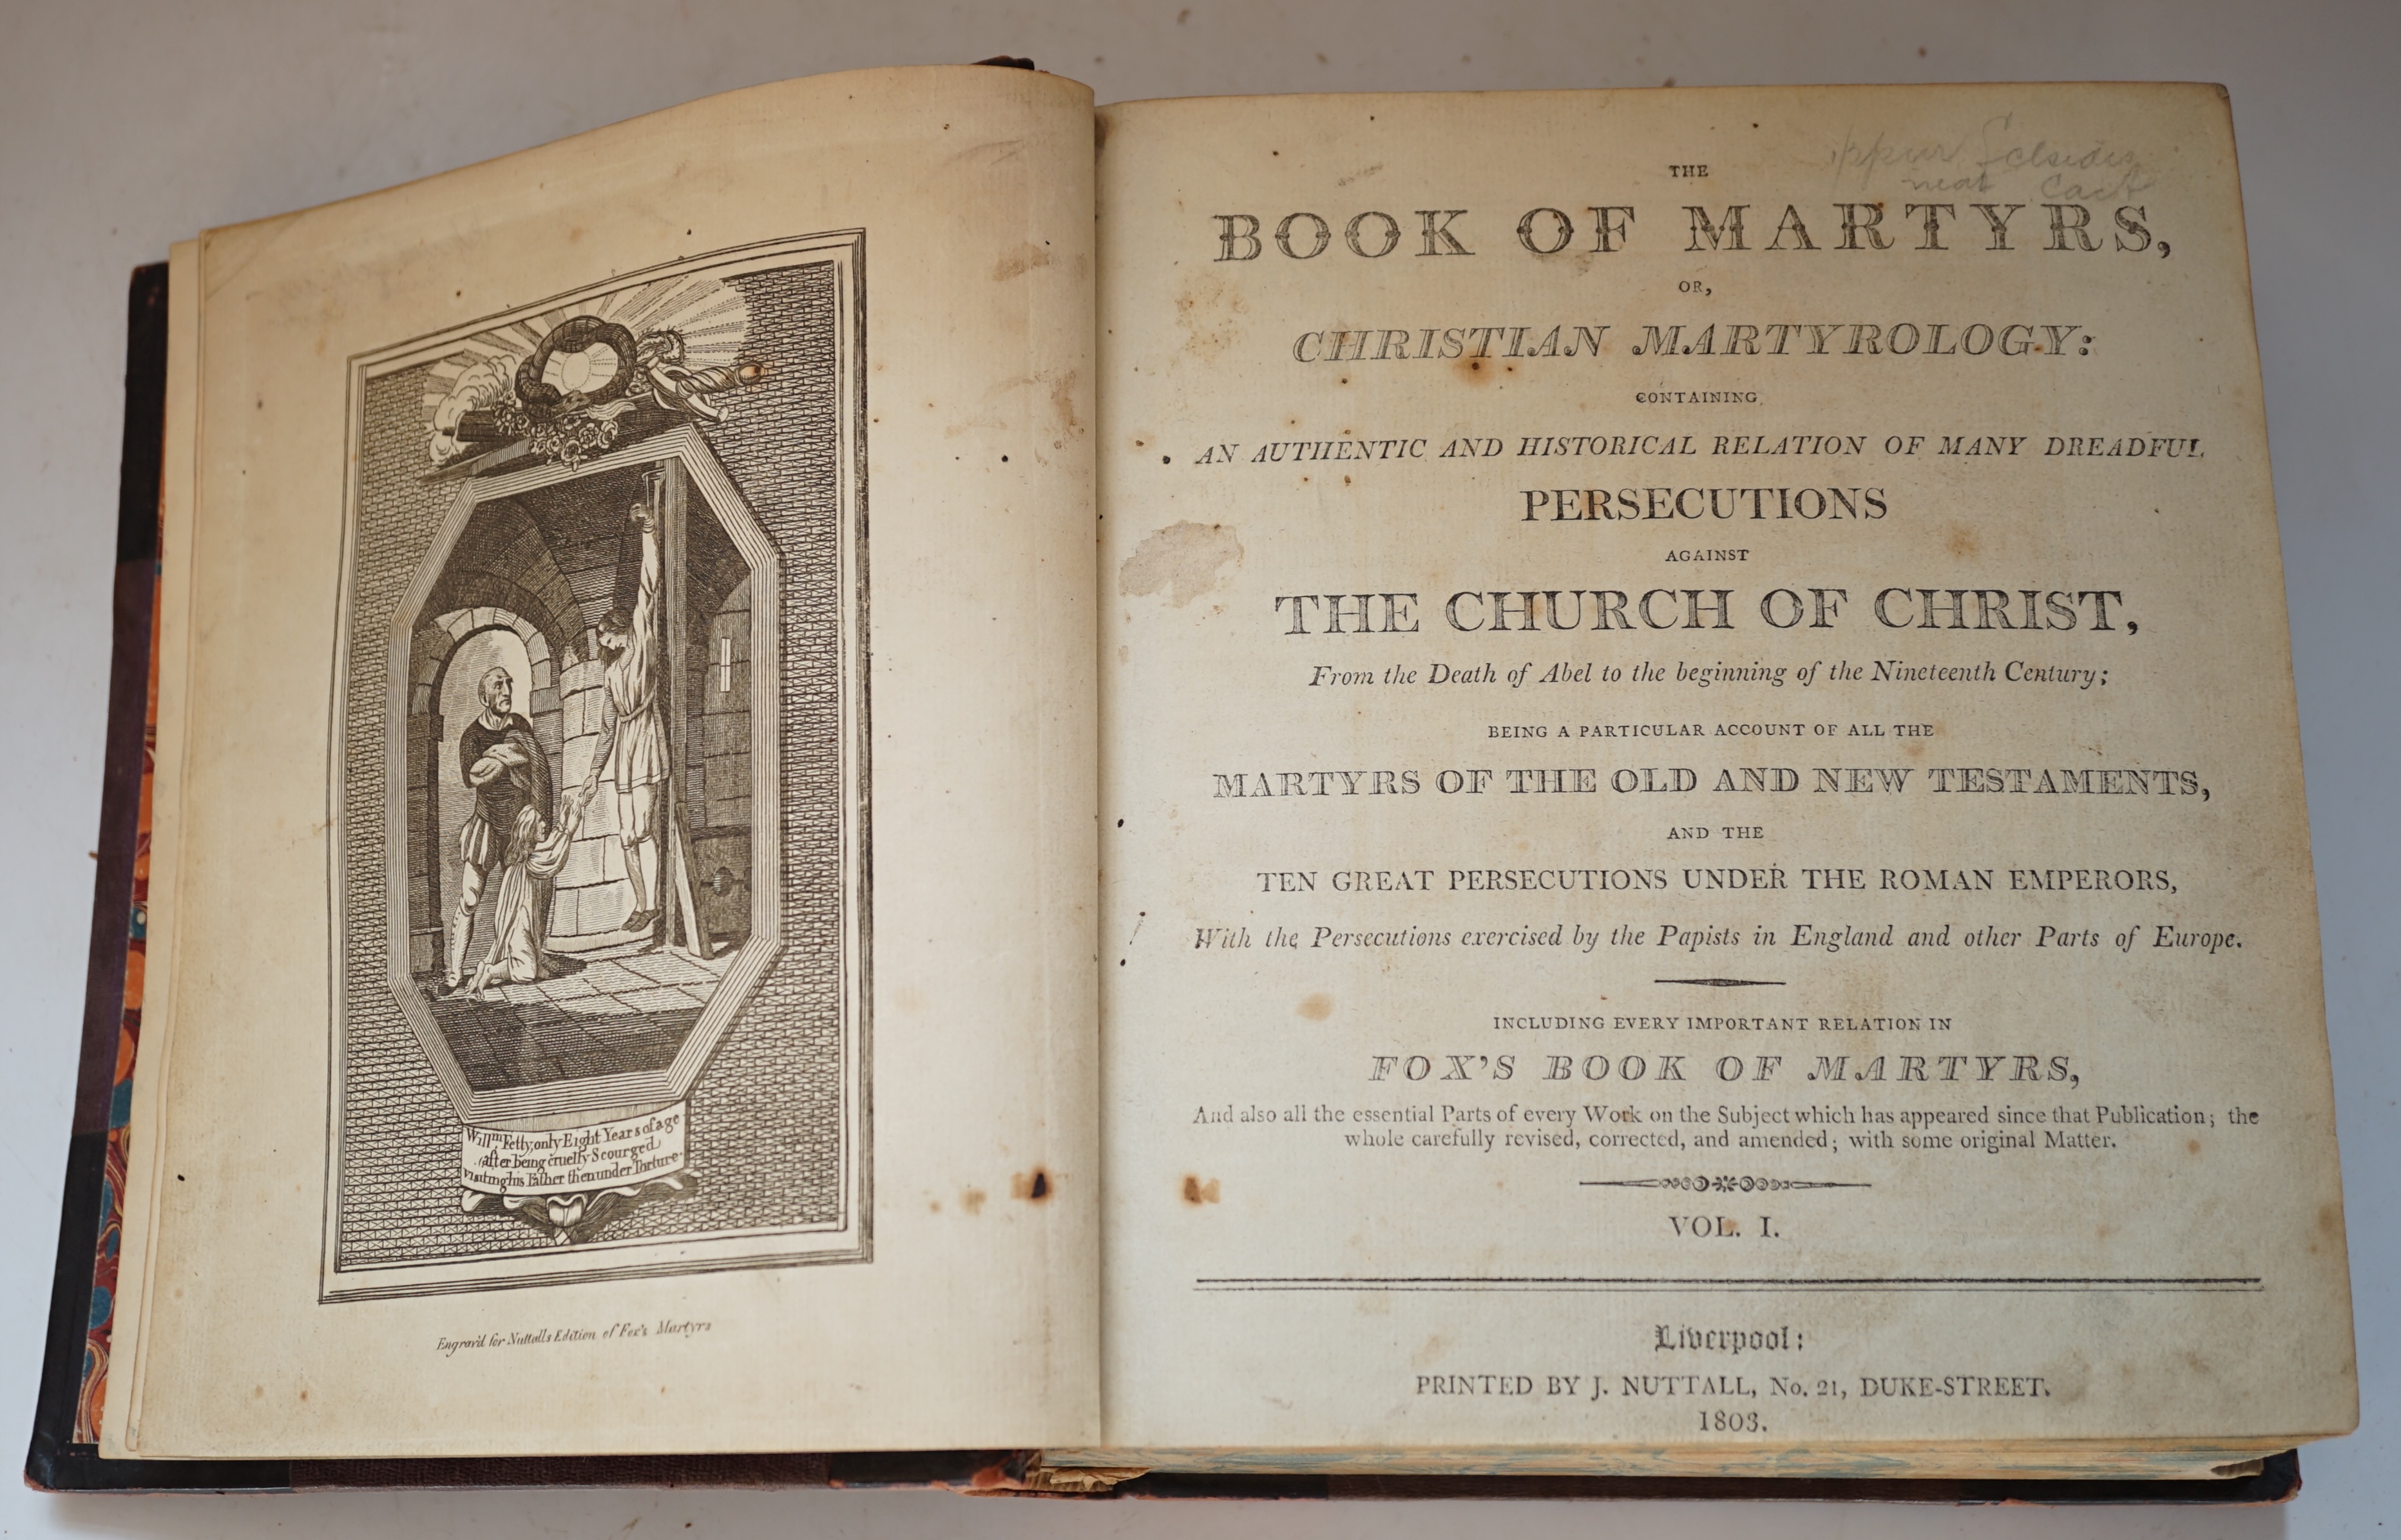 The Book of Martyrs, or, Christian Martyrology…including every important relation in Fox’s Book of Martyrs…, 2 vols in 1, 20 engraved plates, repairs and some loss to pp. 13-16half red morocco, printed by J. Nuttall, Liv